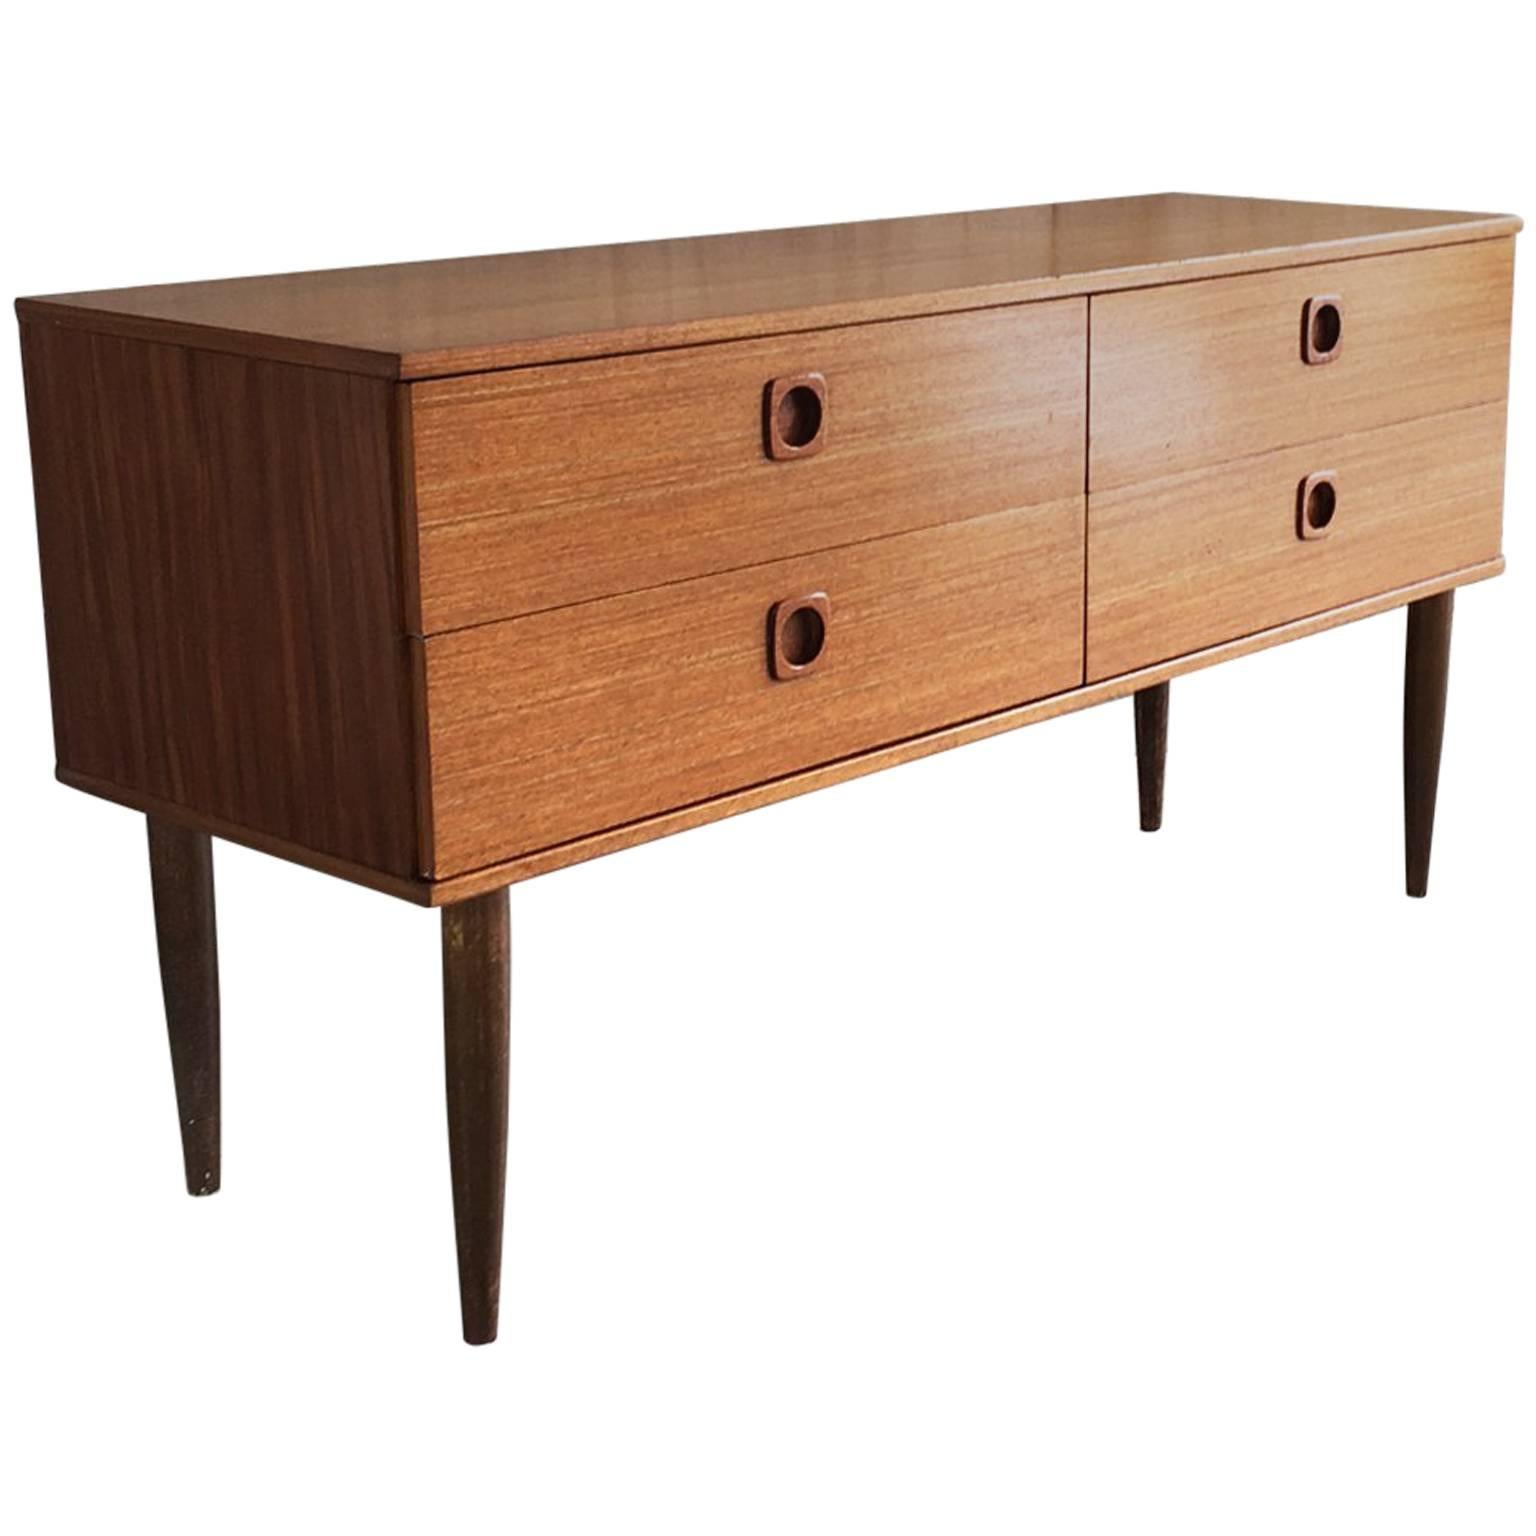 1970s Mid-Century Teak Schreiber Chest of Drawers with Recessed Draw Pulls For Sale